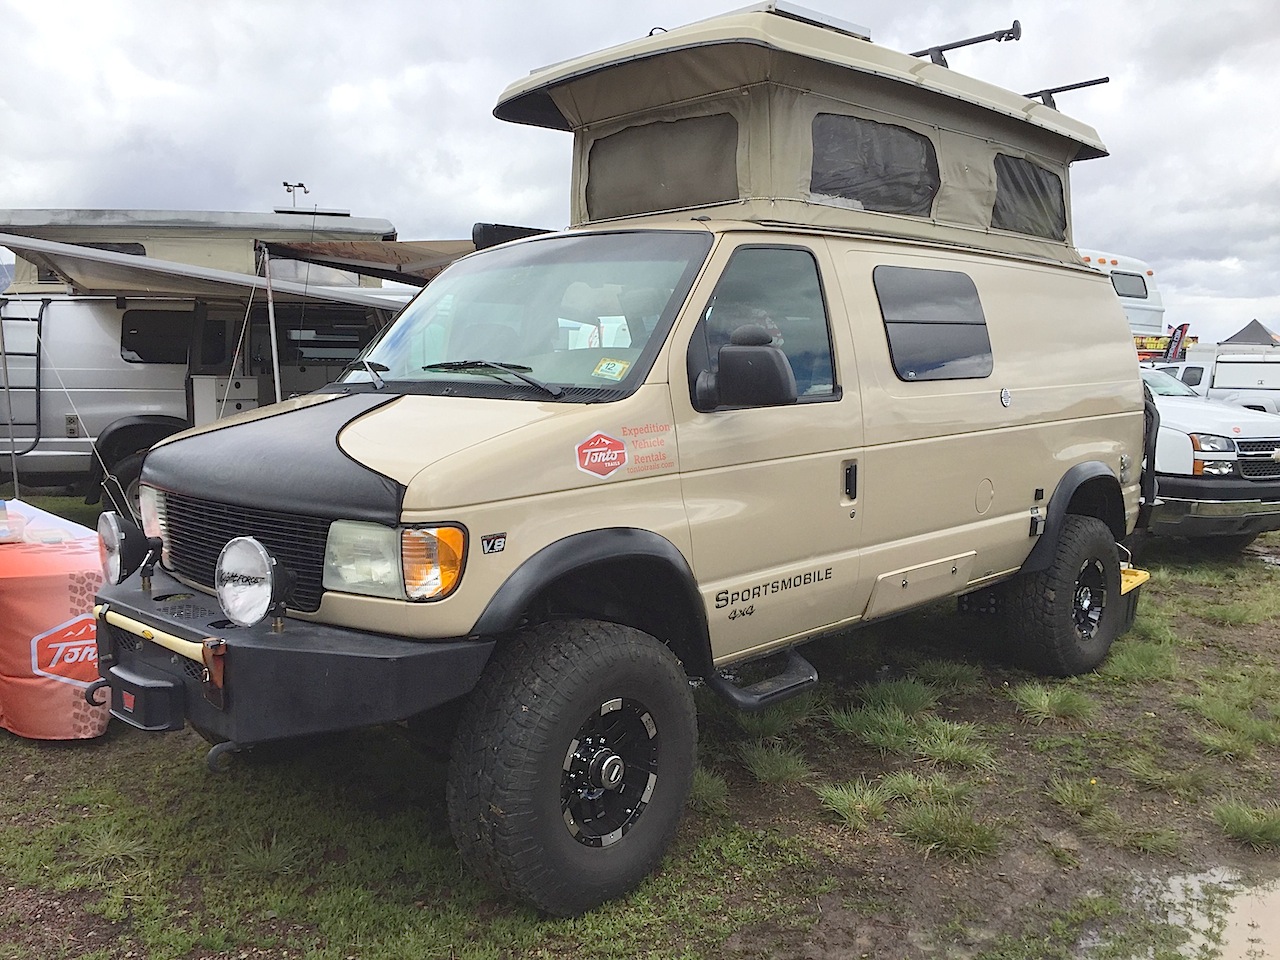 ford-van-sportsmobile-4x4-expedition-rv - The Fast Lane Truck